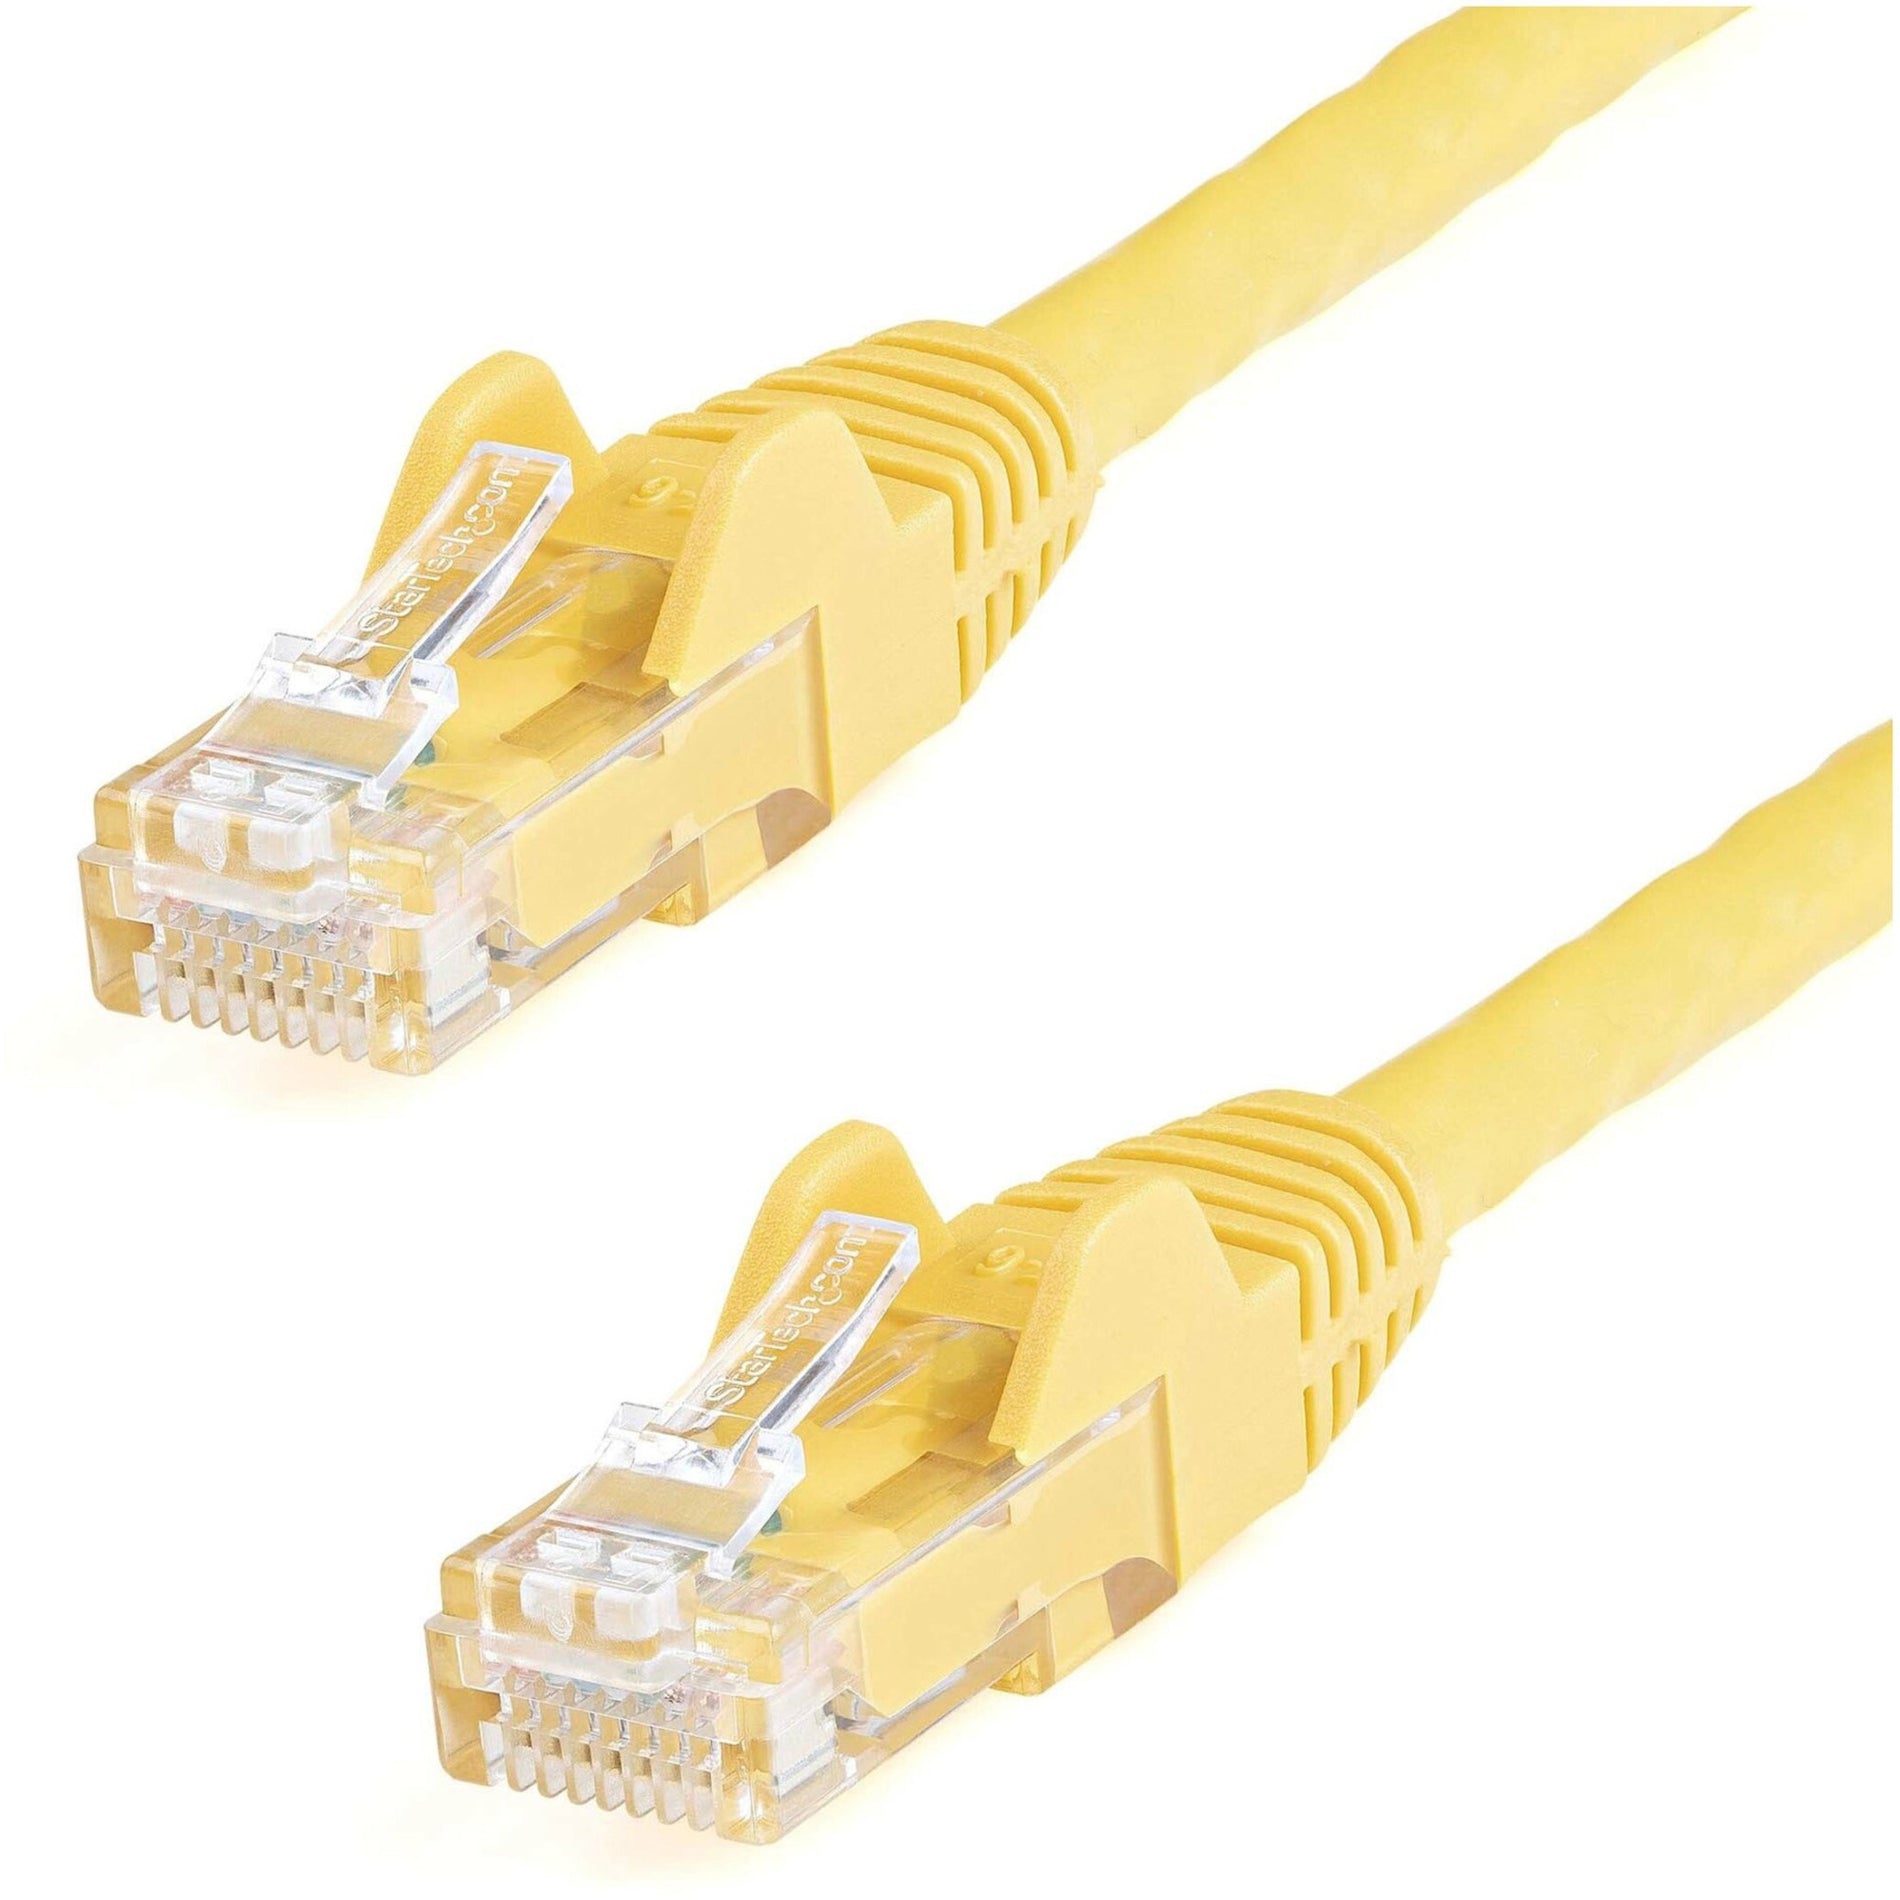 StarTech.com N6PATCH150YL Cat6 Patch Cable, 150ft Yellow Ethernet Cable, Snagless RJ45 Connectors